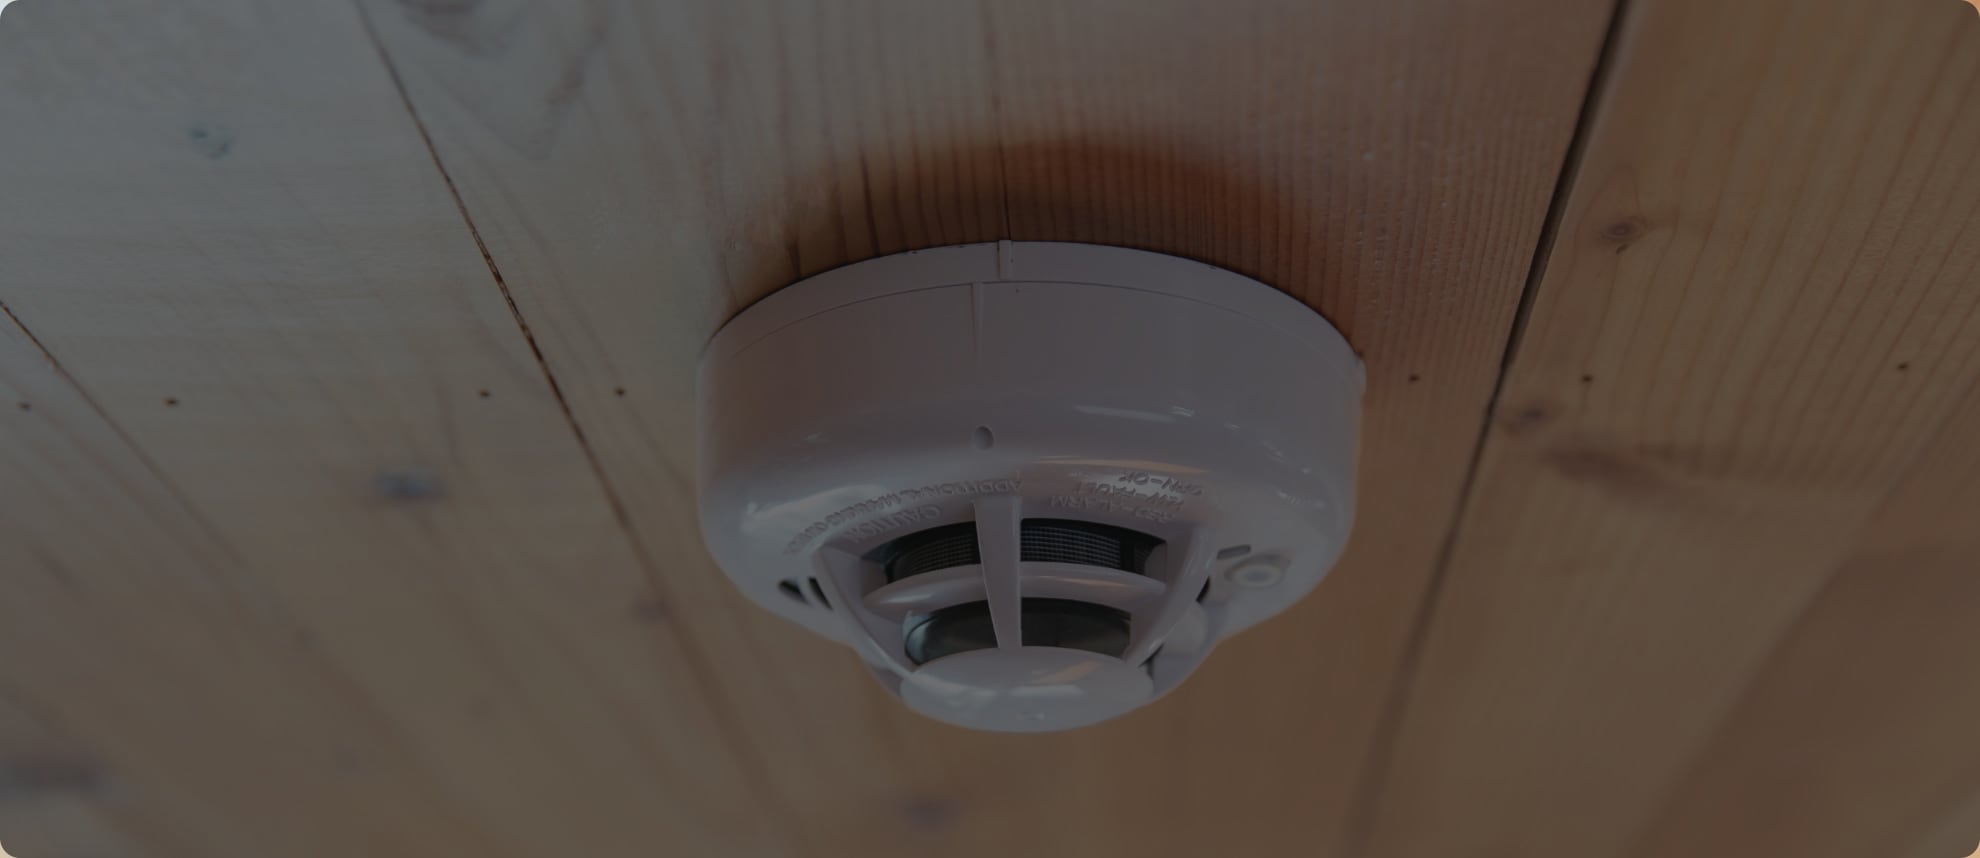 Vivint Monitored Smoke Alarm in Sioux City